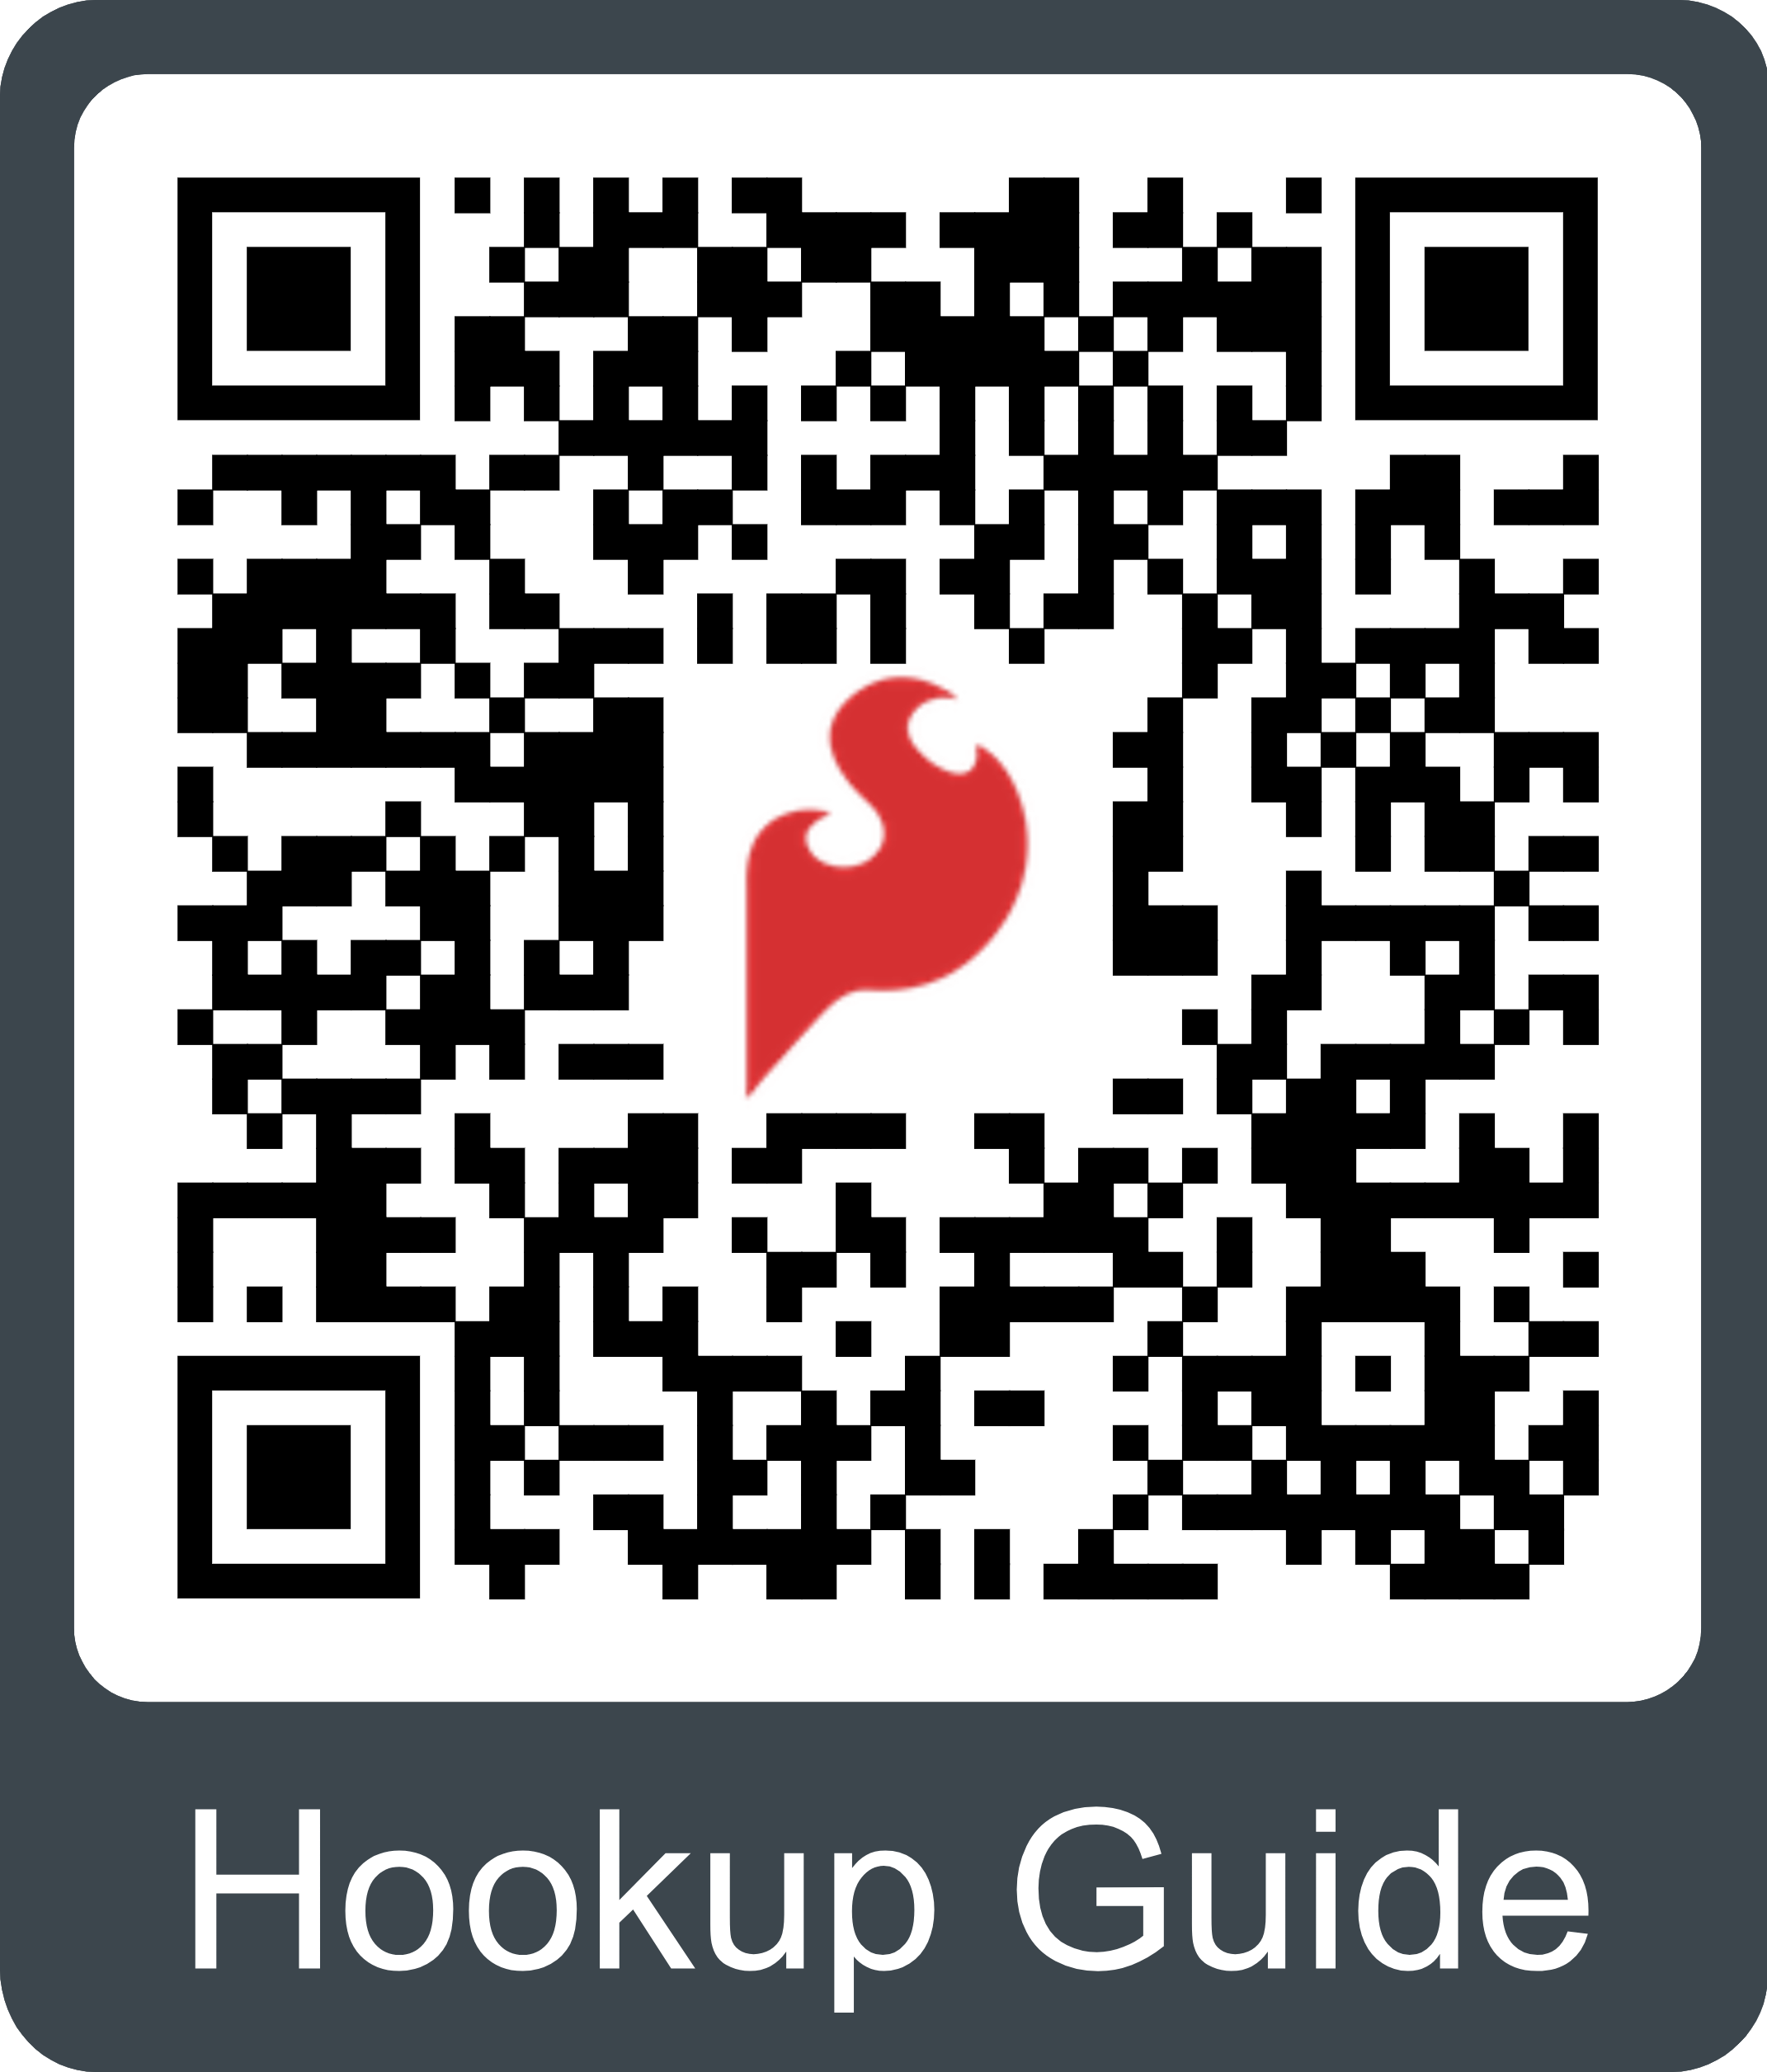 QR code to the hookup guide